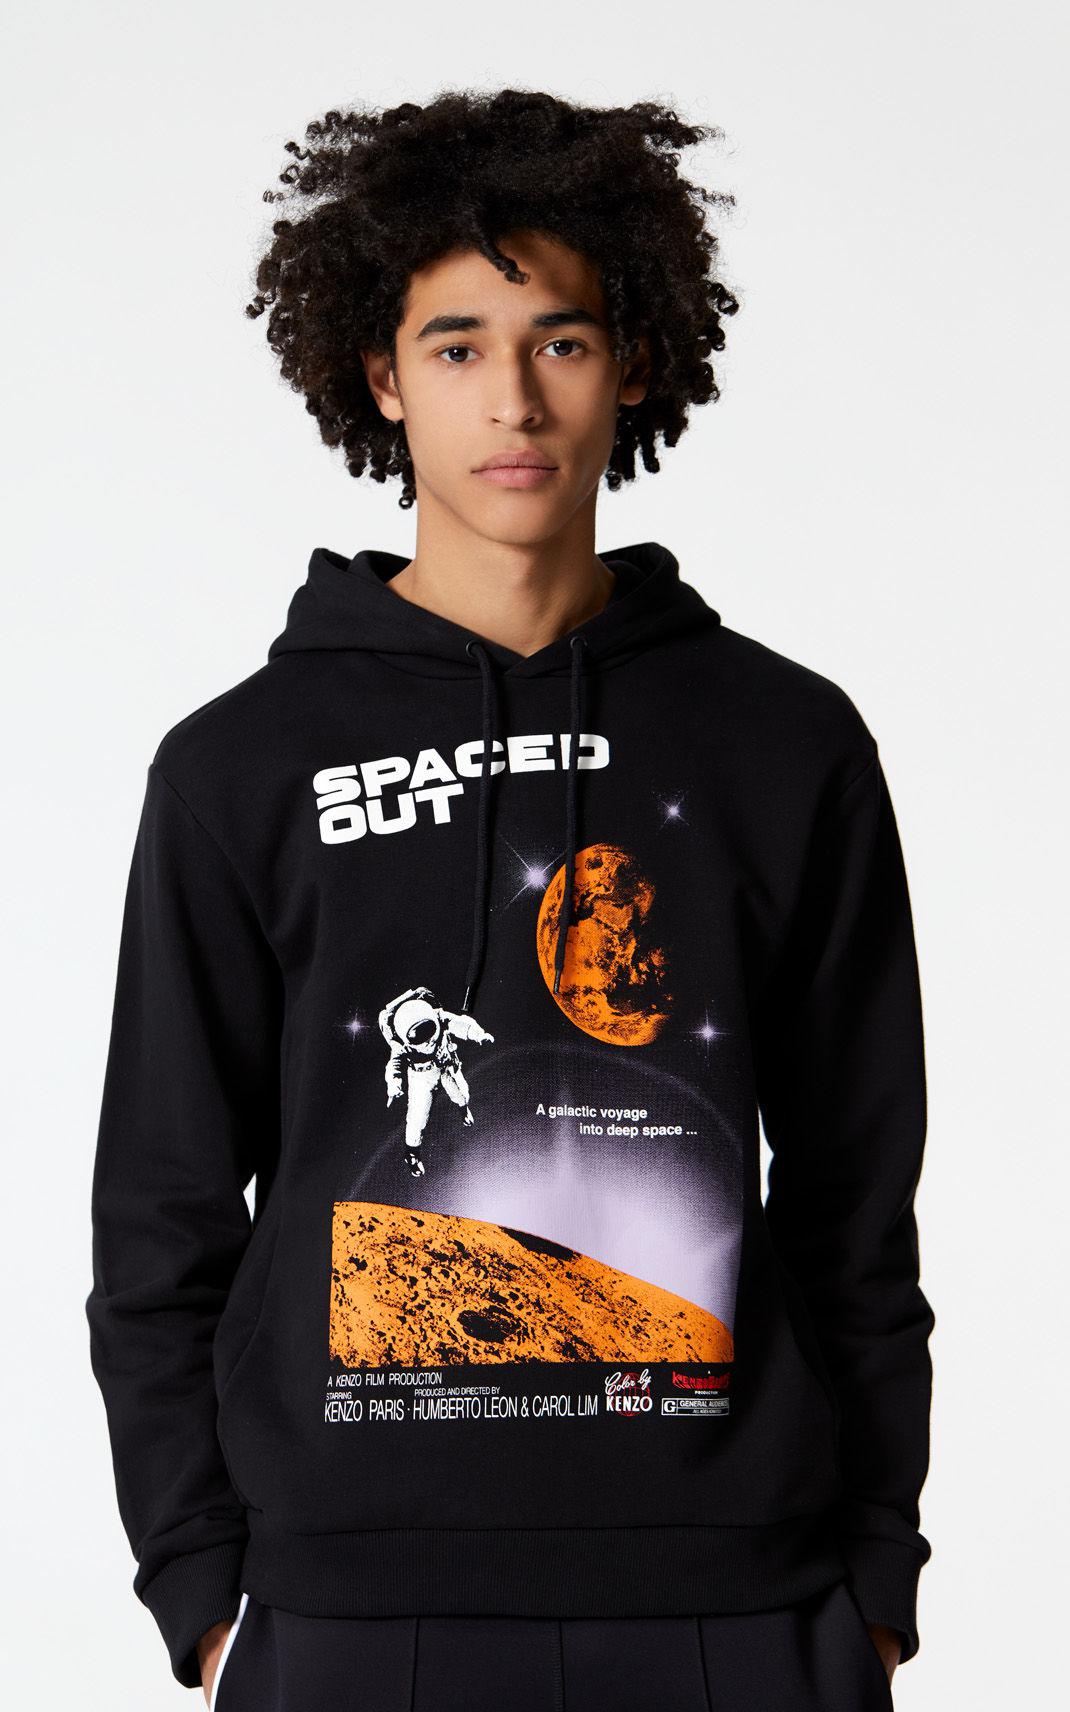 kenzo spaced out hoodie